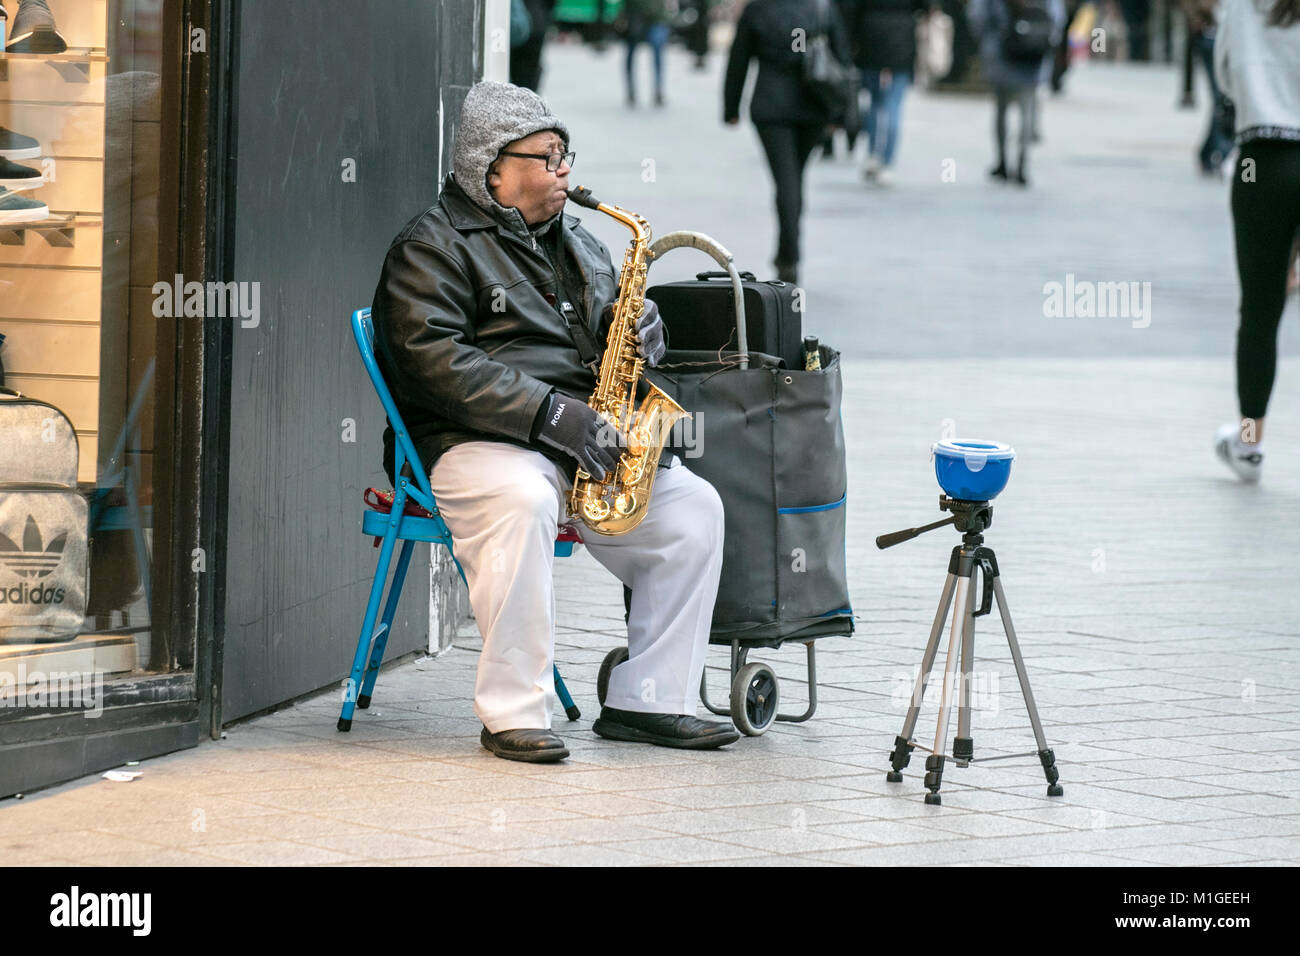 A street busker playing his saxophone hoping for cash donations on the streets of Liverpool city centre, United Kingdom Stock Photo